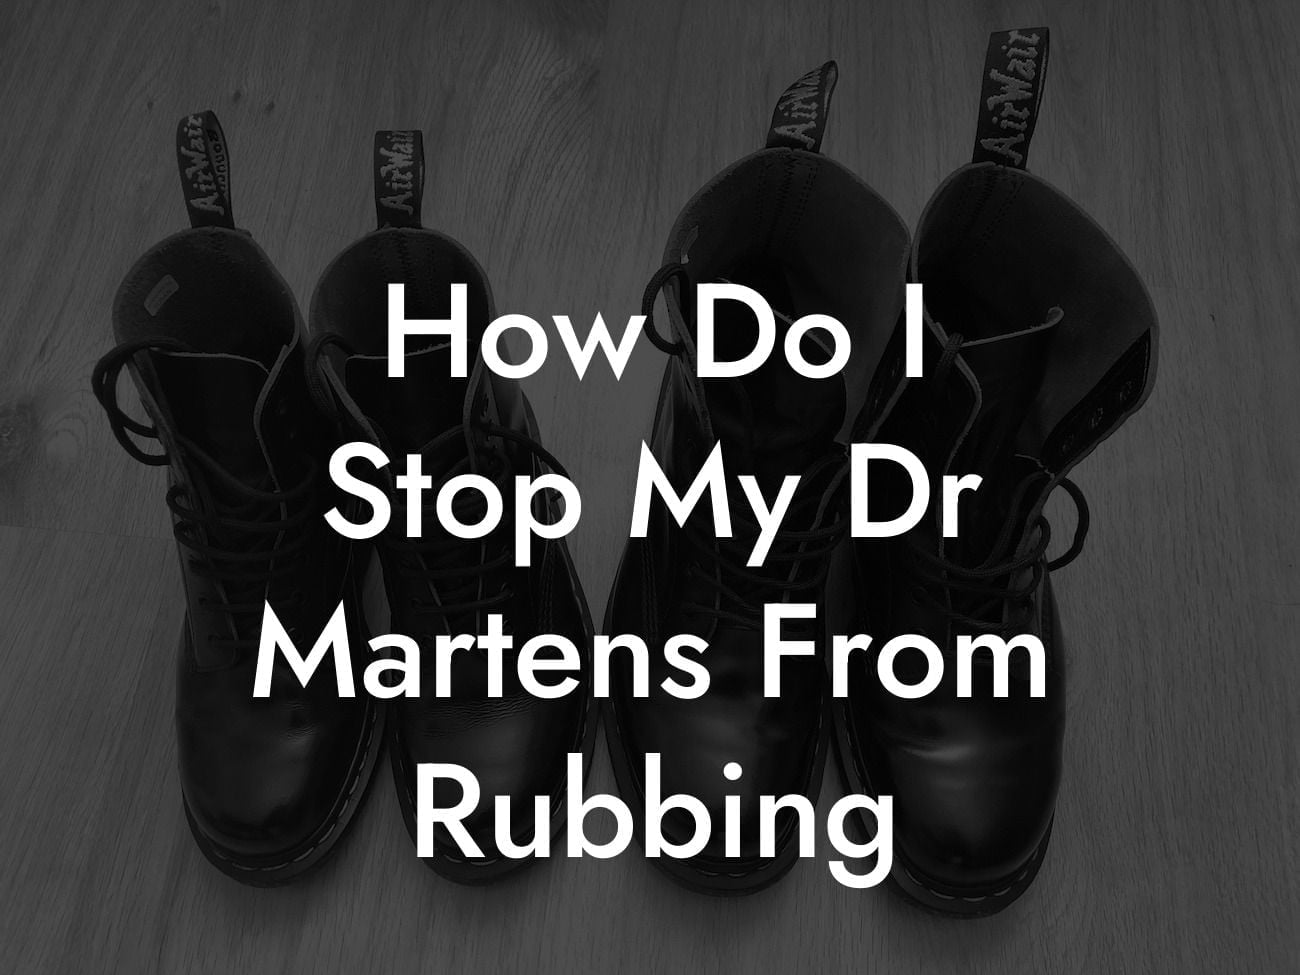 How Do I Stop My Dr Martens From Rubbing